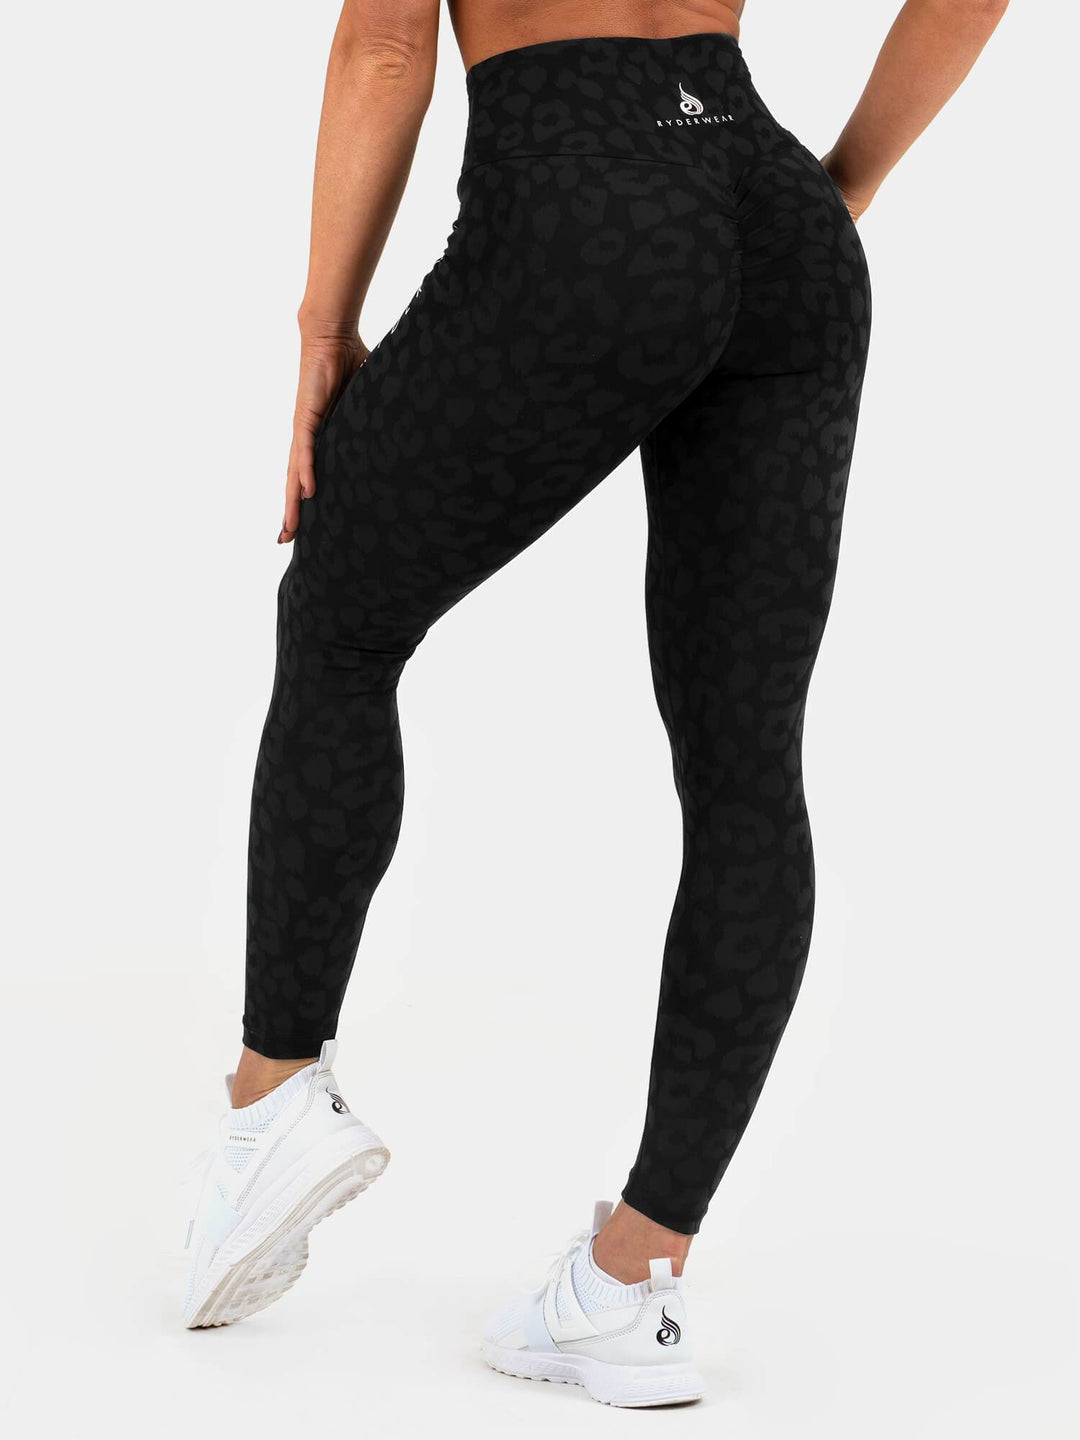 Leopard Print Atheltic Leggings Featuring Butt Sculpting Design. - High  Waistband - Ruched Seam on Butt - 6 Pairs Per Pack - Sizes: 1 S / 2 M / 2 L  / 1 XL - 93% Polyester, 7% Spandex, 7309856